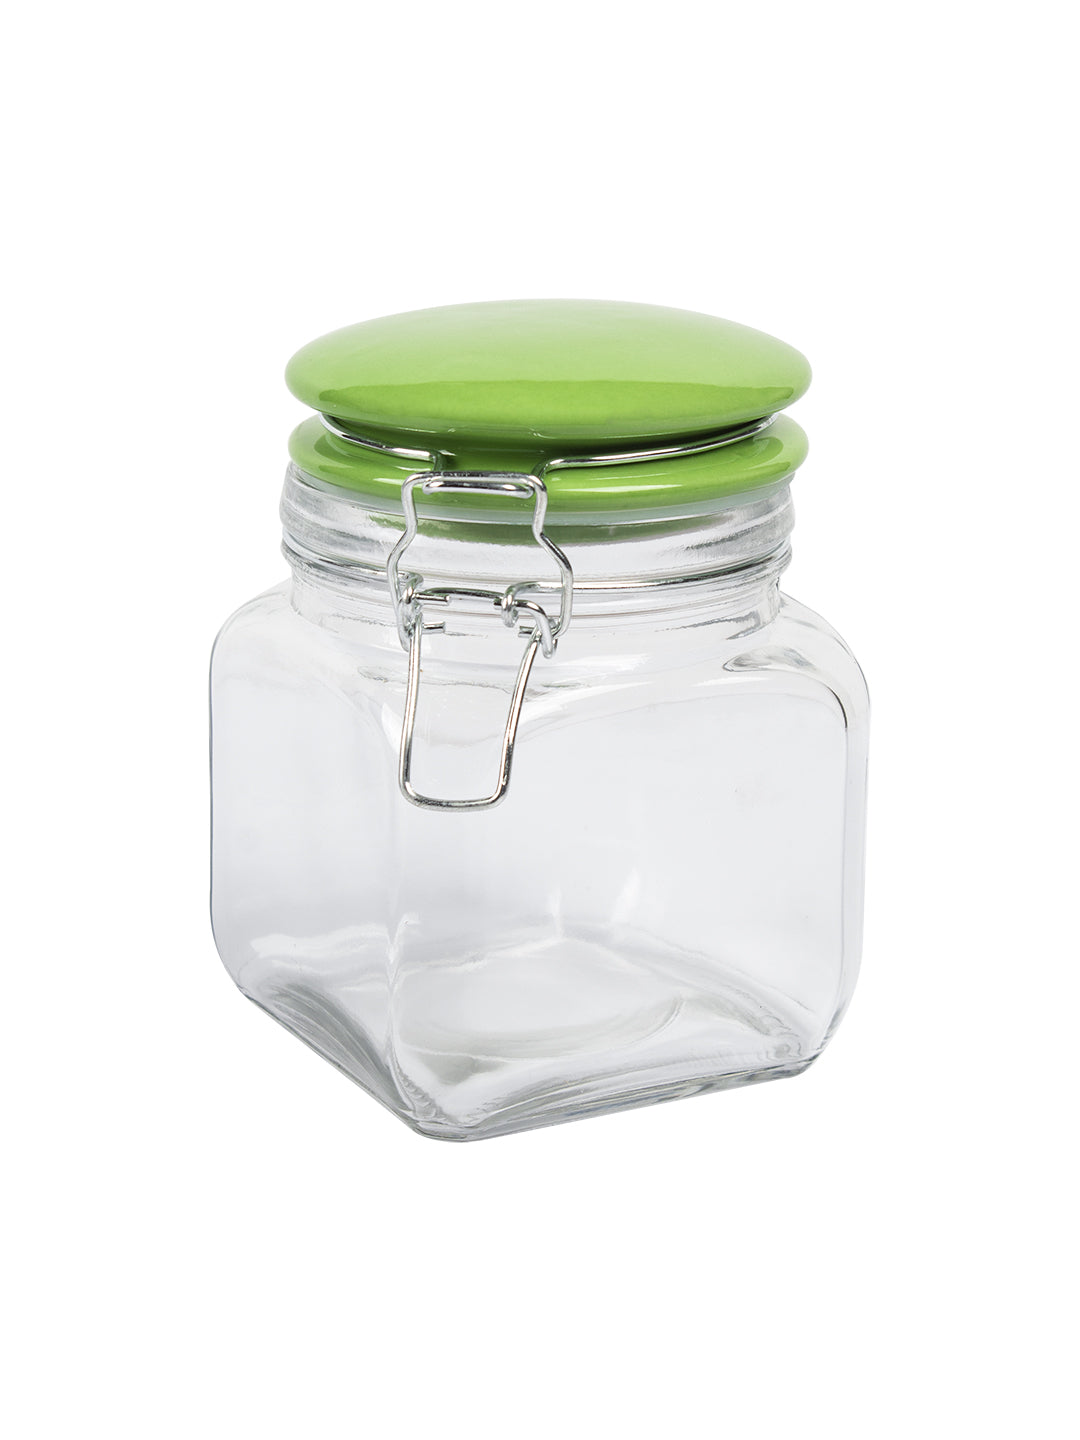 Glass Jar With Green Ceramic Lid Pack Of 2 Pcs - (Each 700 Ml)